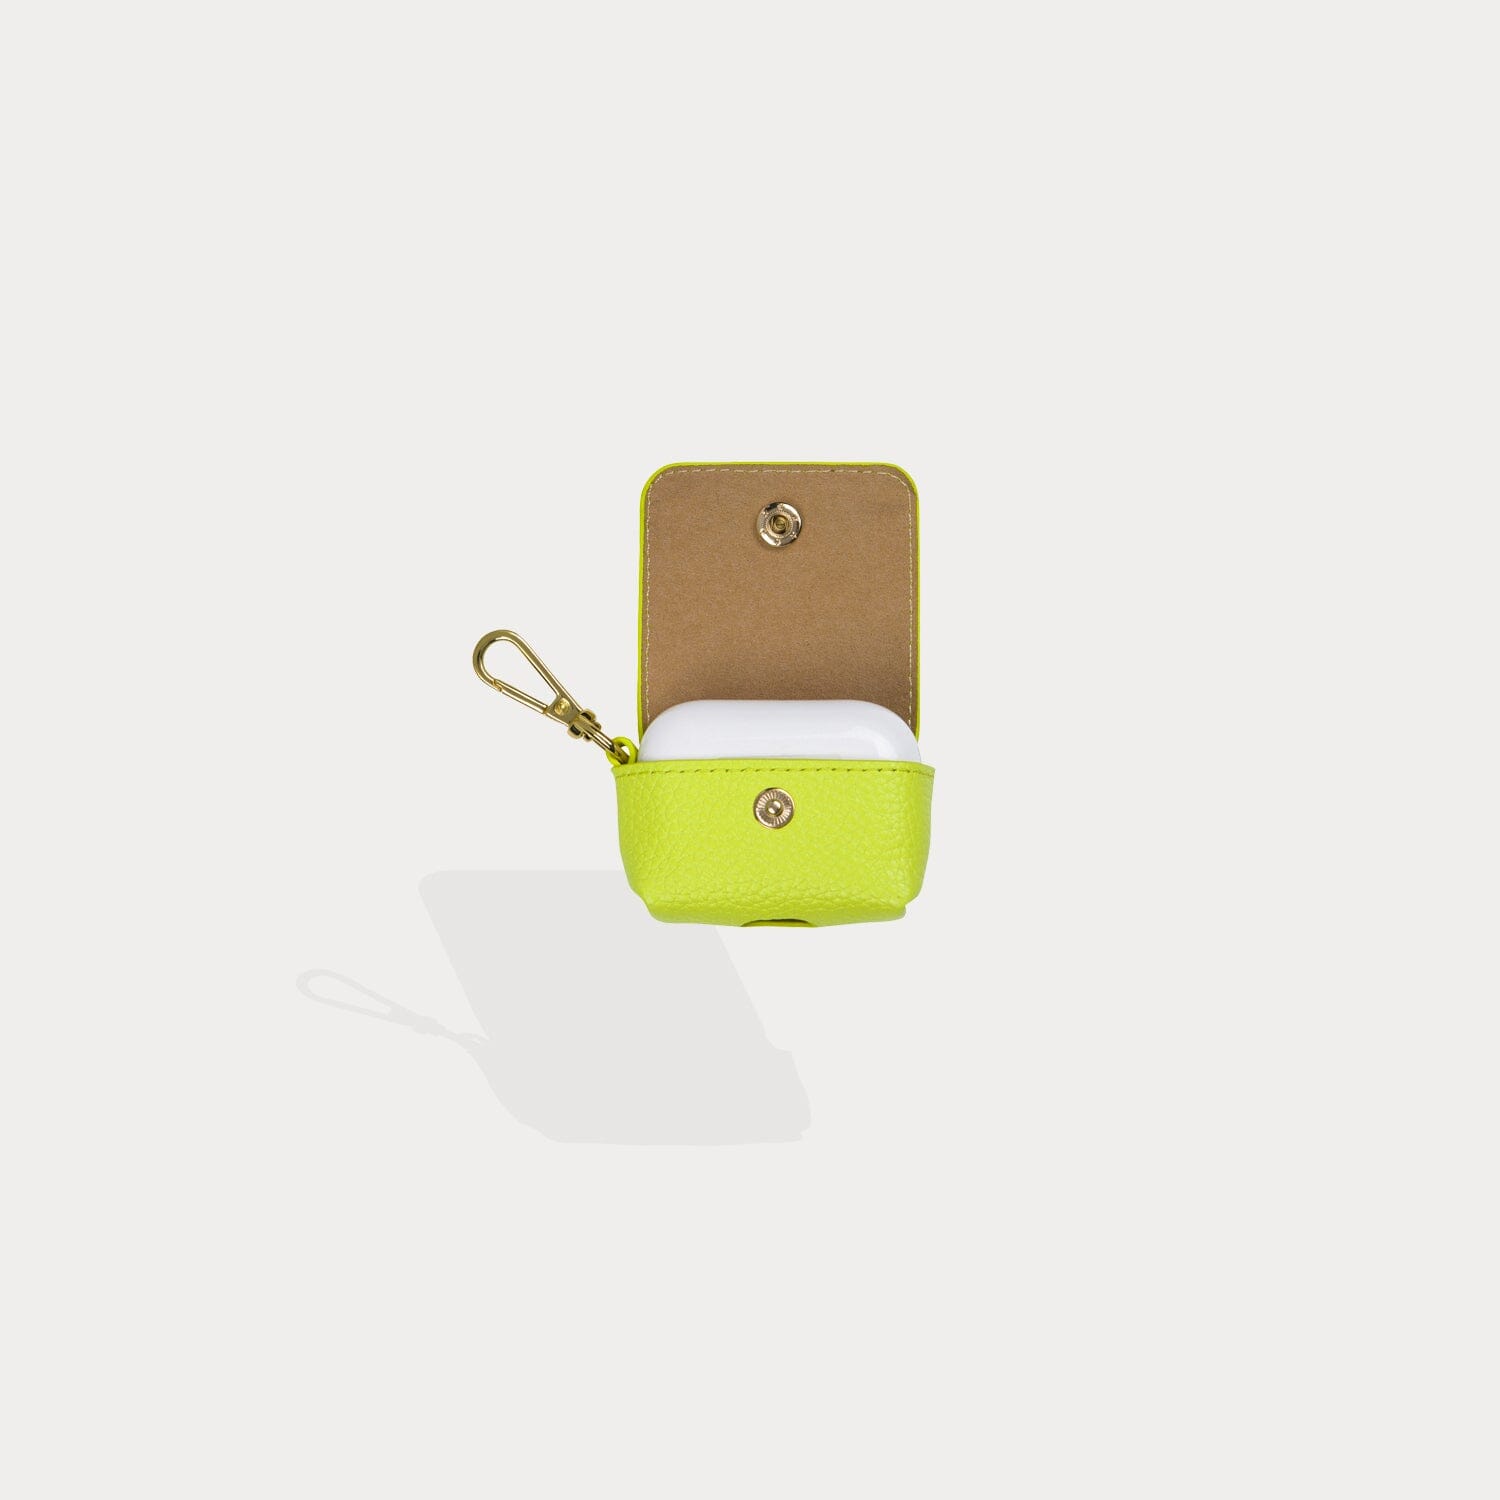 Avery AirPod Clip-On Pouch - Neon Yellow/Gold Pouch Core Bandolier 